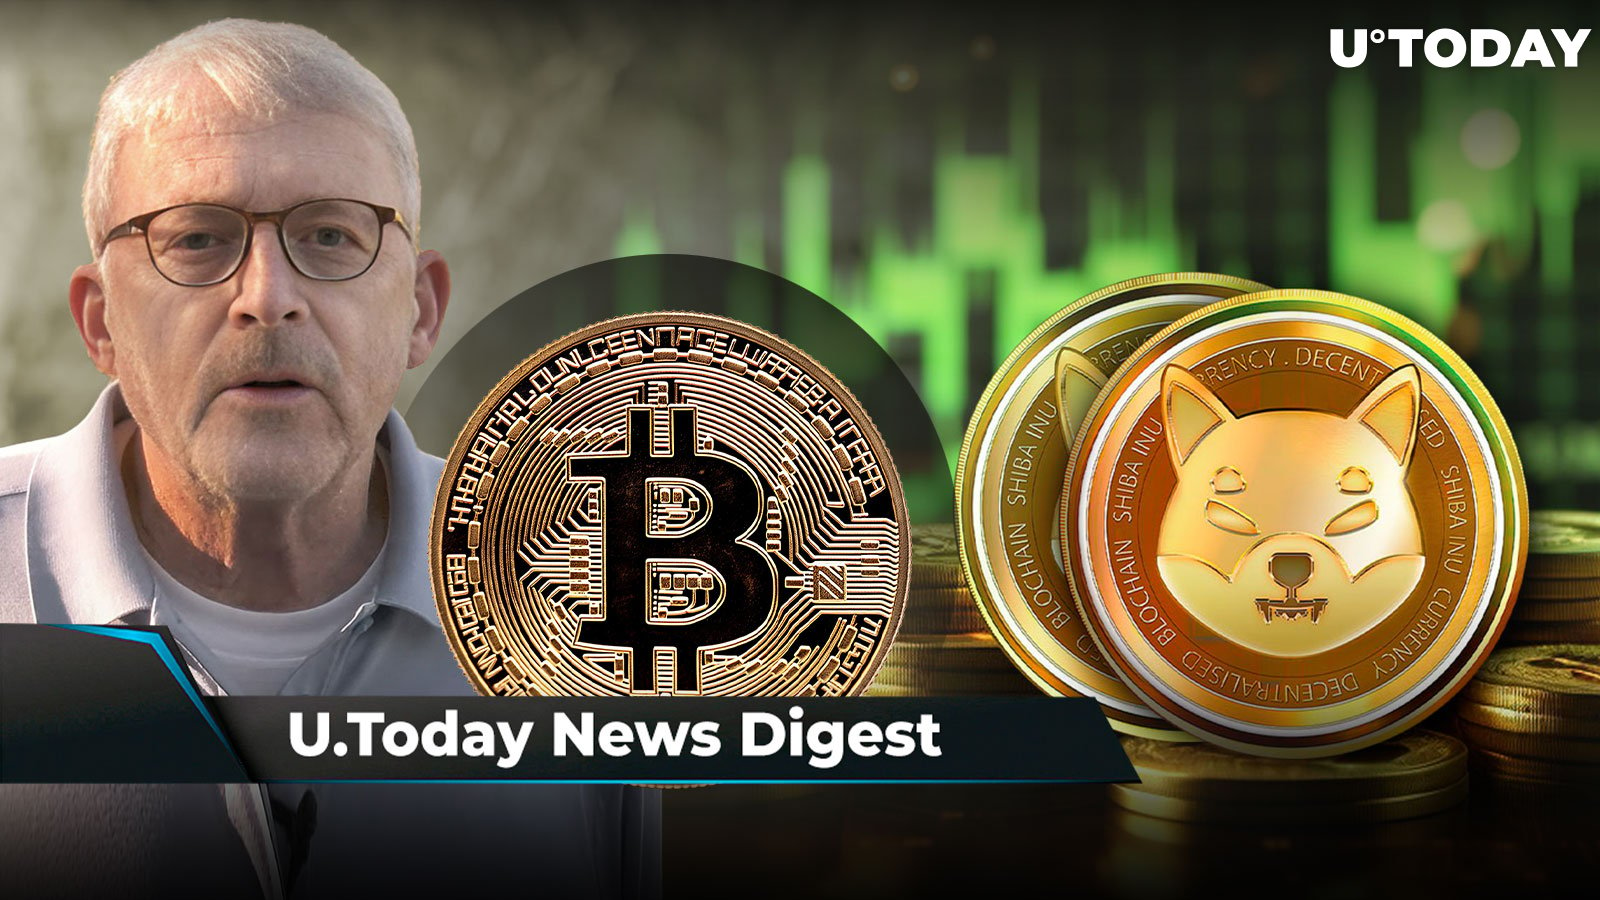 Peter Brandt abandons epic Bitcoin price prediction, Shiba Inu erases zero, Dogecoin gets new listing on major Japanese exchange: U.Today's Crypto News Digest